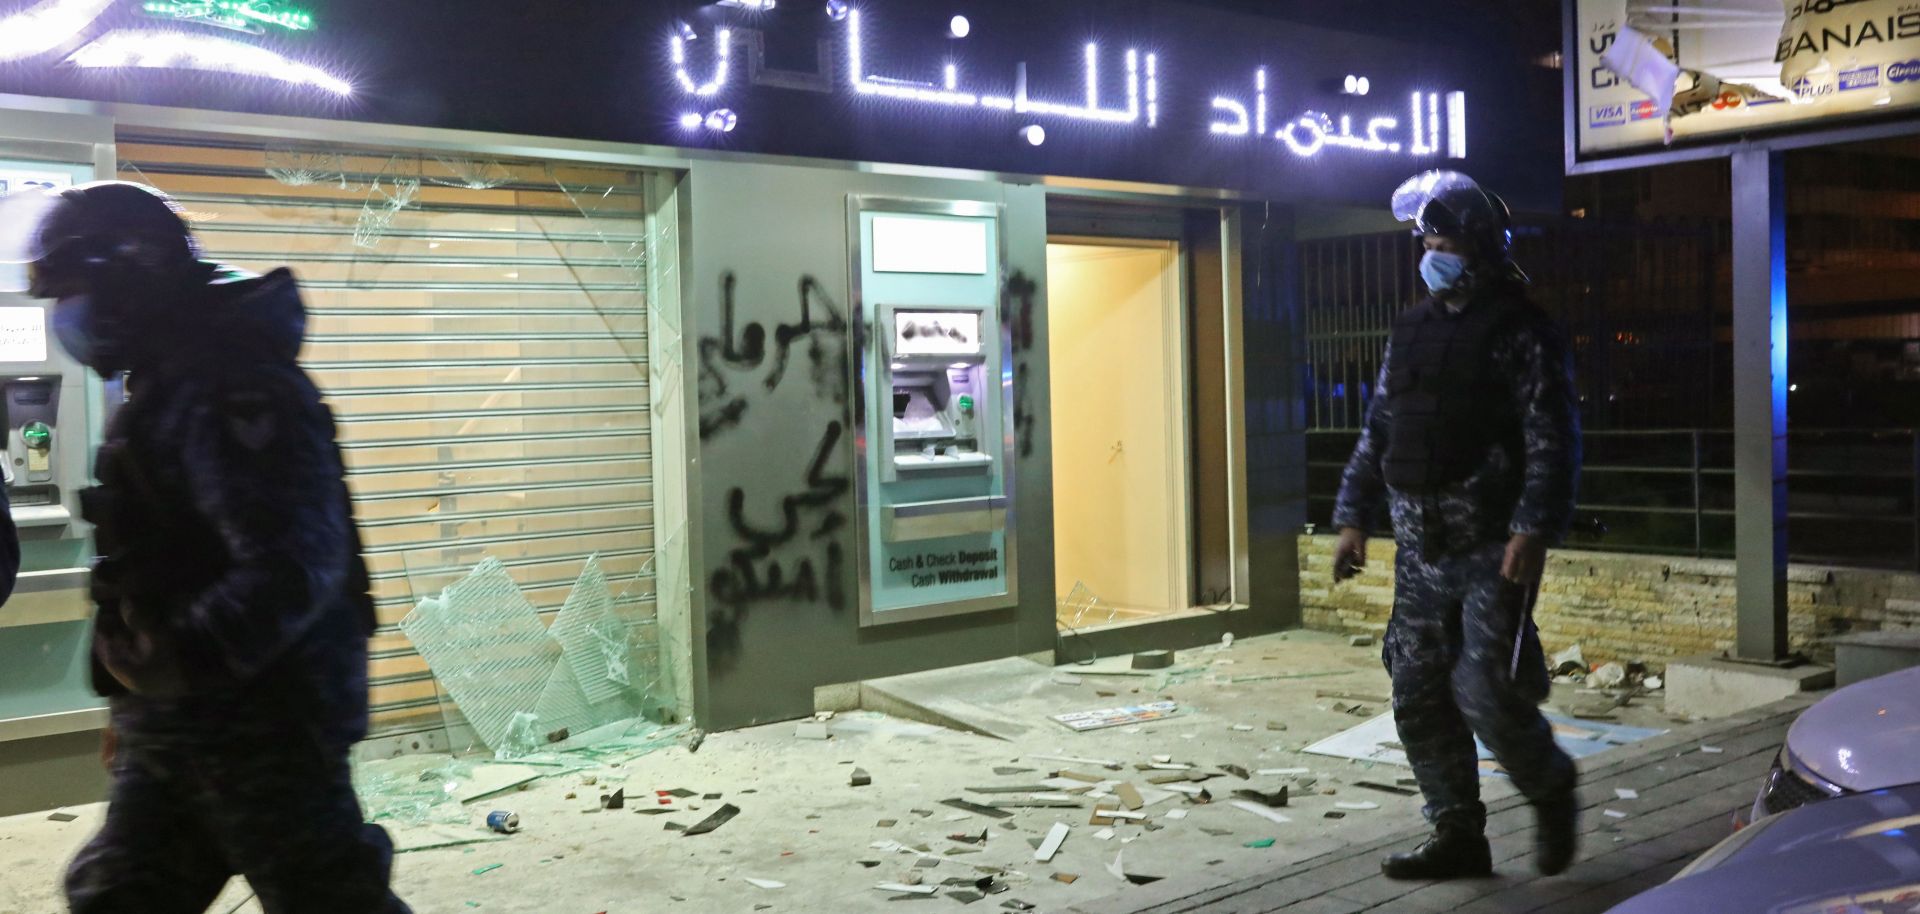 Lebanese police walk by a bank vandalized during protests in Beirut on Jan. 16, 2020.